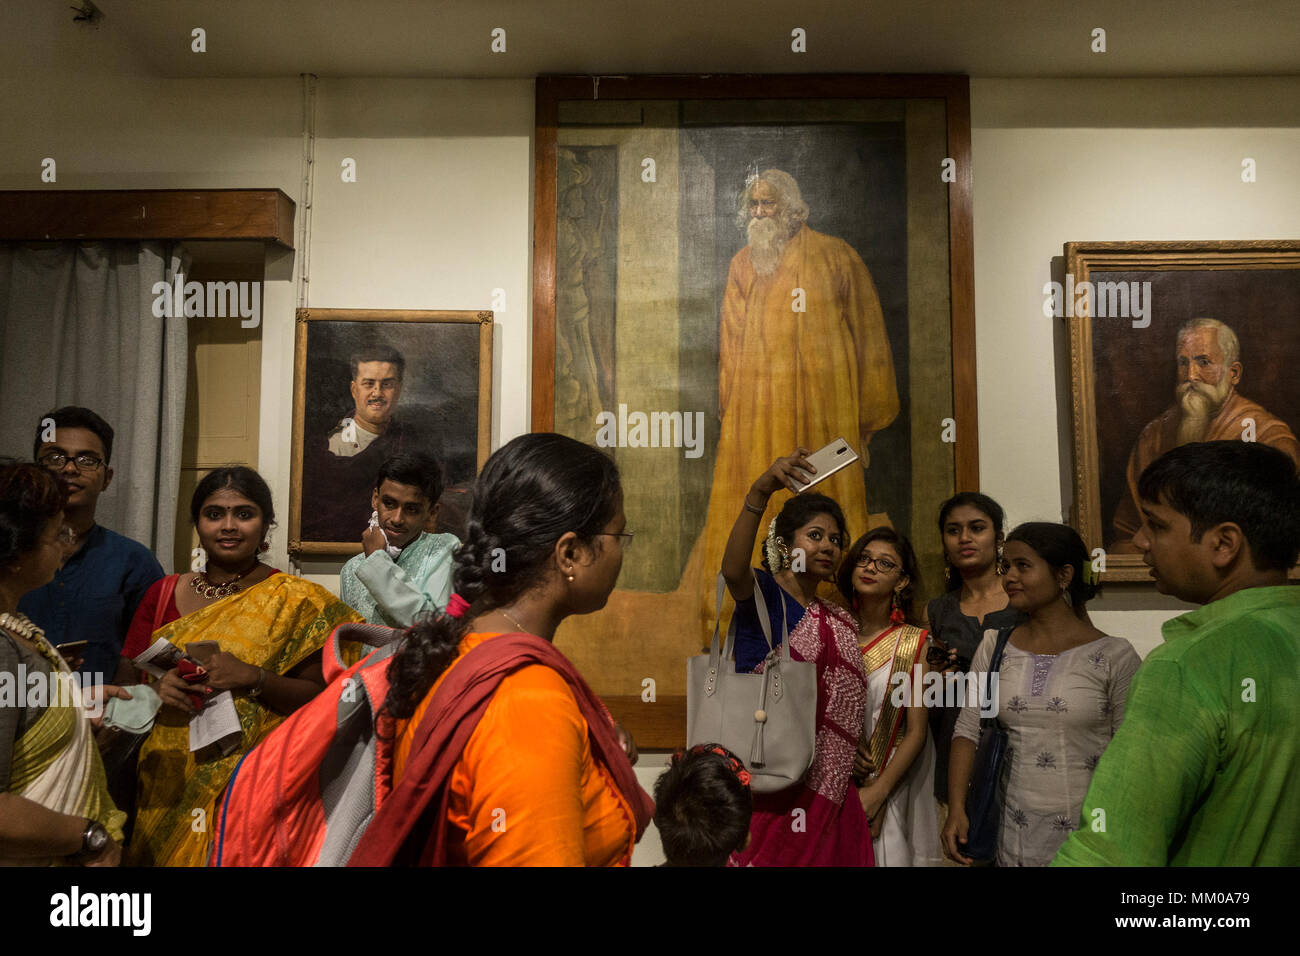 Kolkata. 9th May, 2018. Indian people visit the museum at Nobel laureate poet Rabindranath Tagore's house during the celebration of his 157th birth anniversary in Kolkata, India on May 9, 2018. Tagore was the first Asian to win Nobel Prize for his collection of poems 'Geetanjali' in 1913. Credit: Tumpa Mondal/Xinhua/Alamy Live News Stock Photo